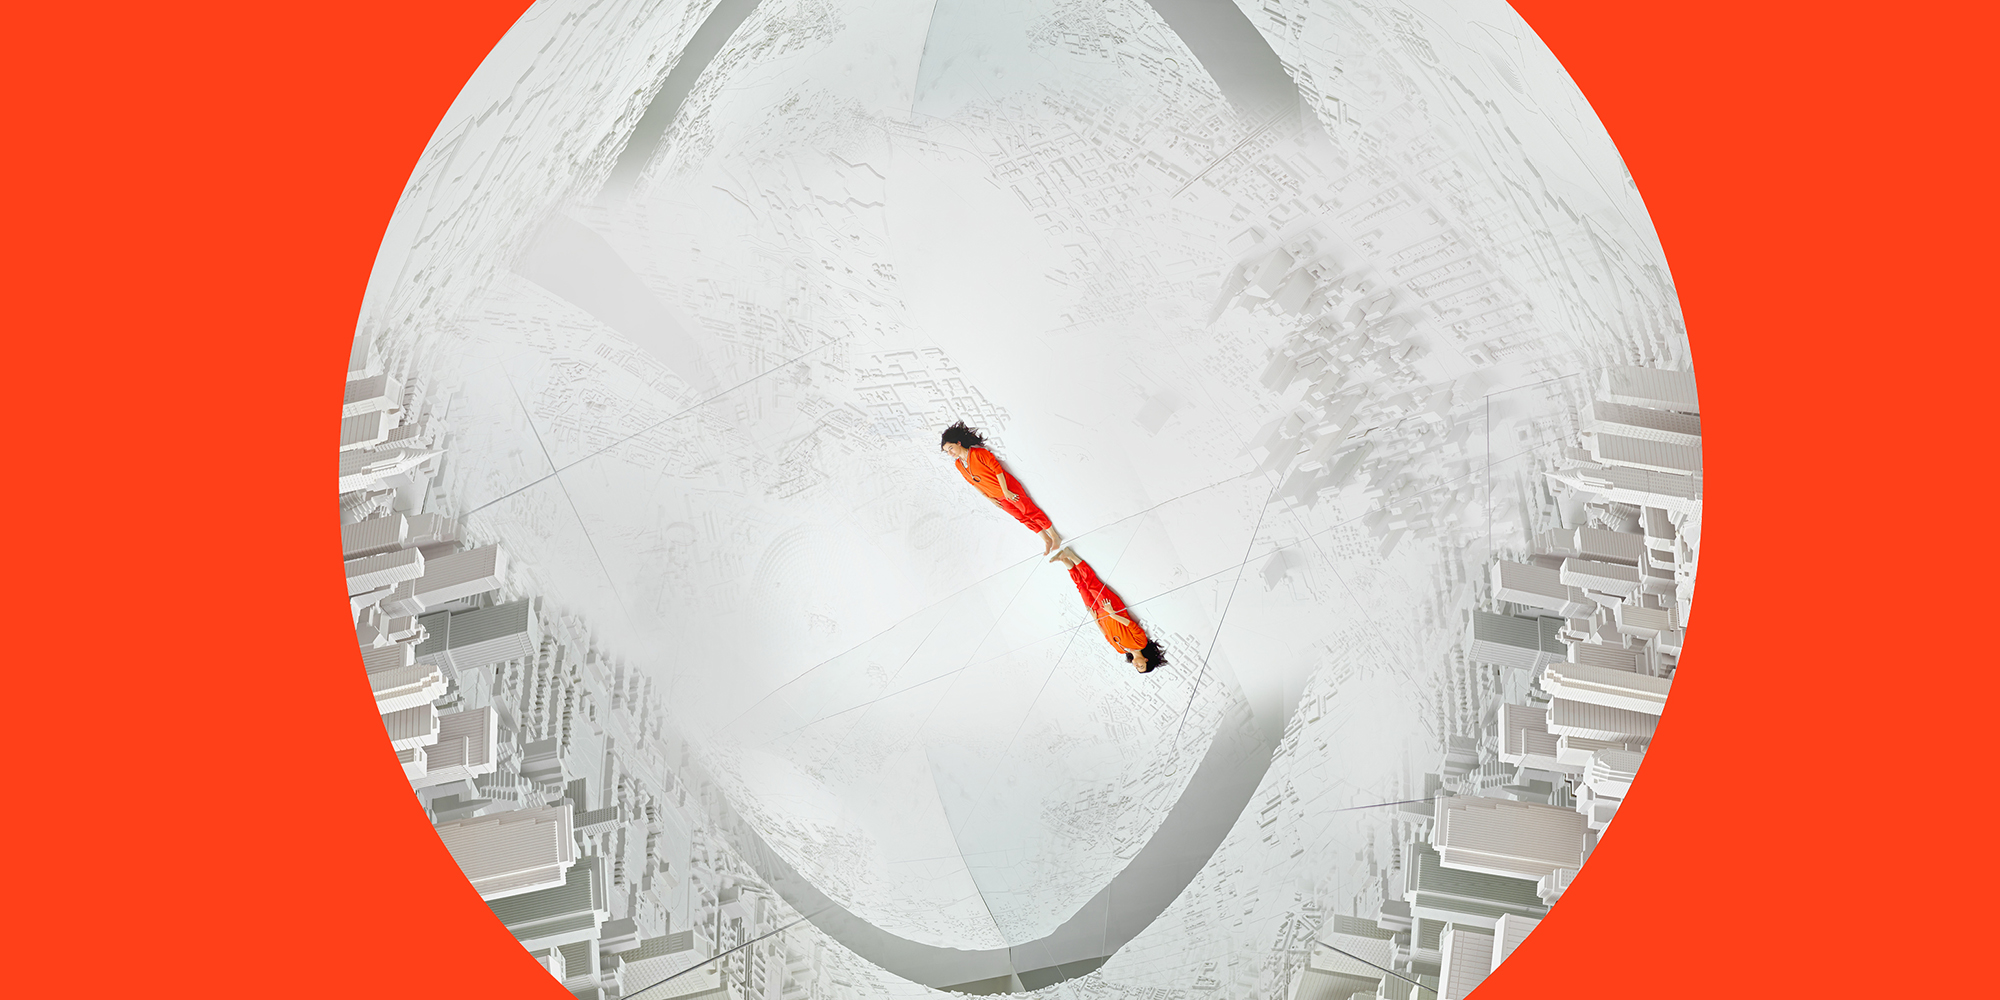 Es Devlin, a white woman with dark hair wearing a vibrant red jumpsuit, appears miniscule in the center of a gray and white sphere with swooping gray arches and city skylines. The images on the sphere are mirrored, as is Es herself; a reflection of her extends upside down from beneath her feet.